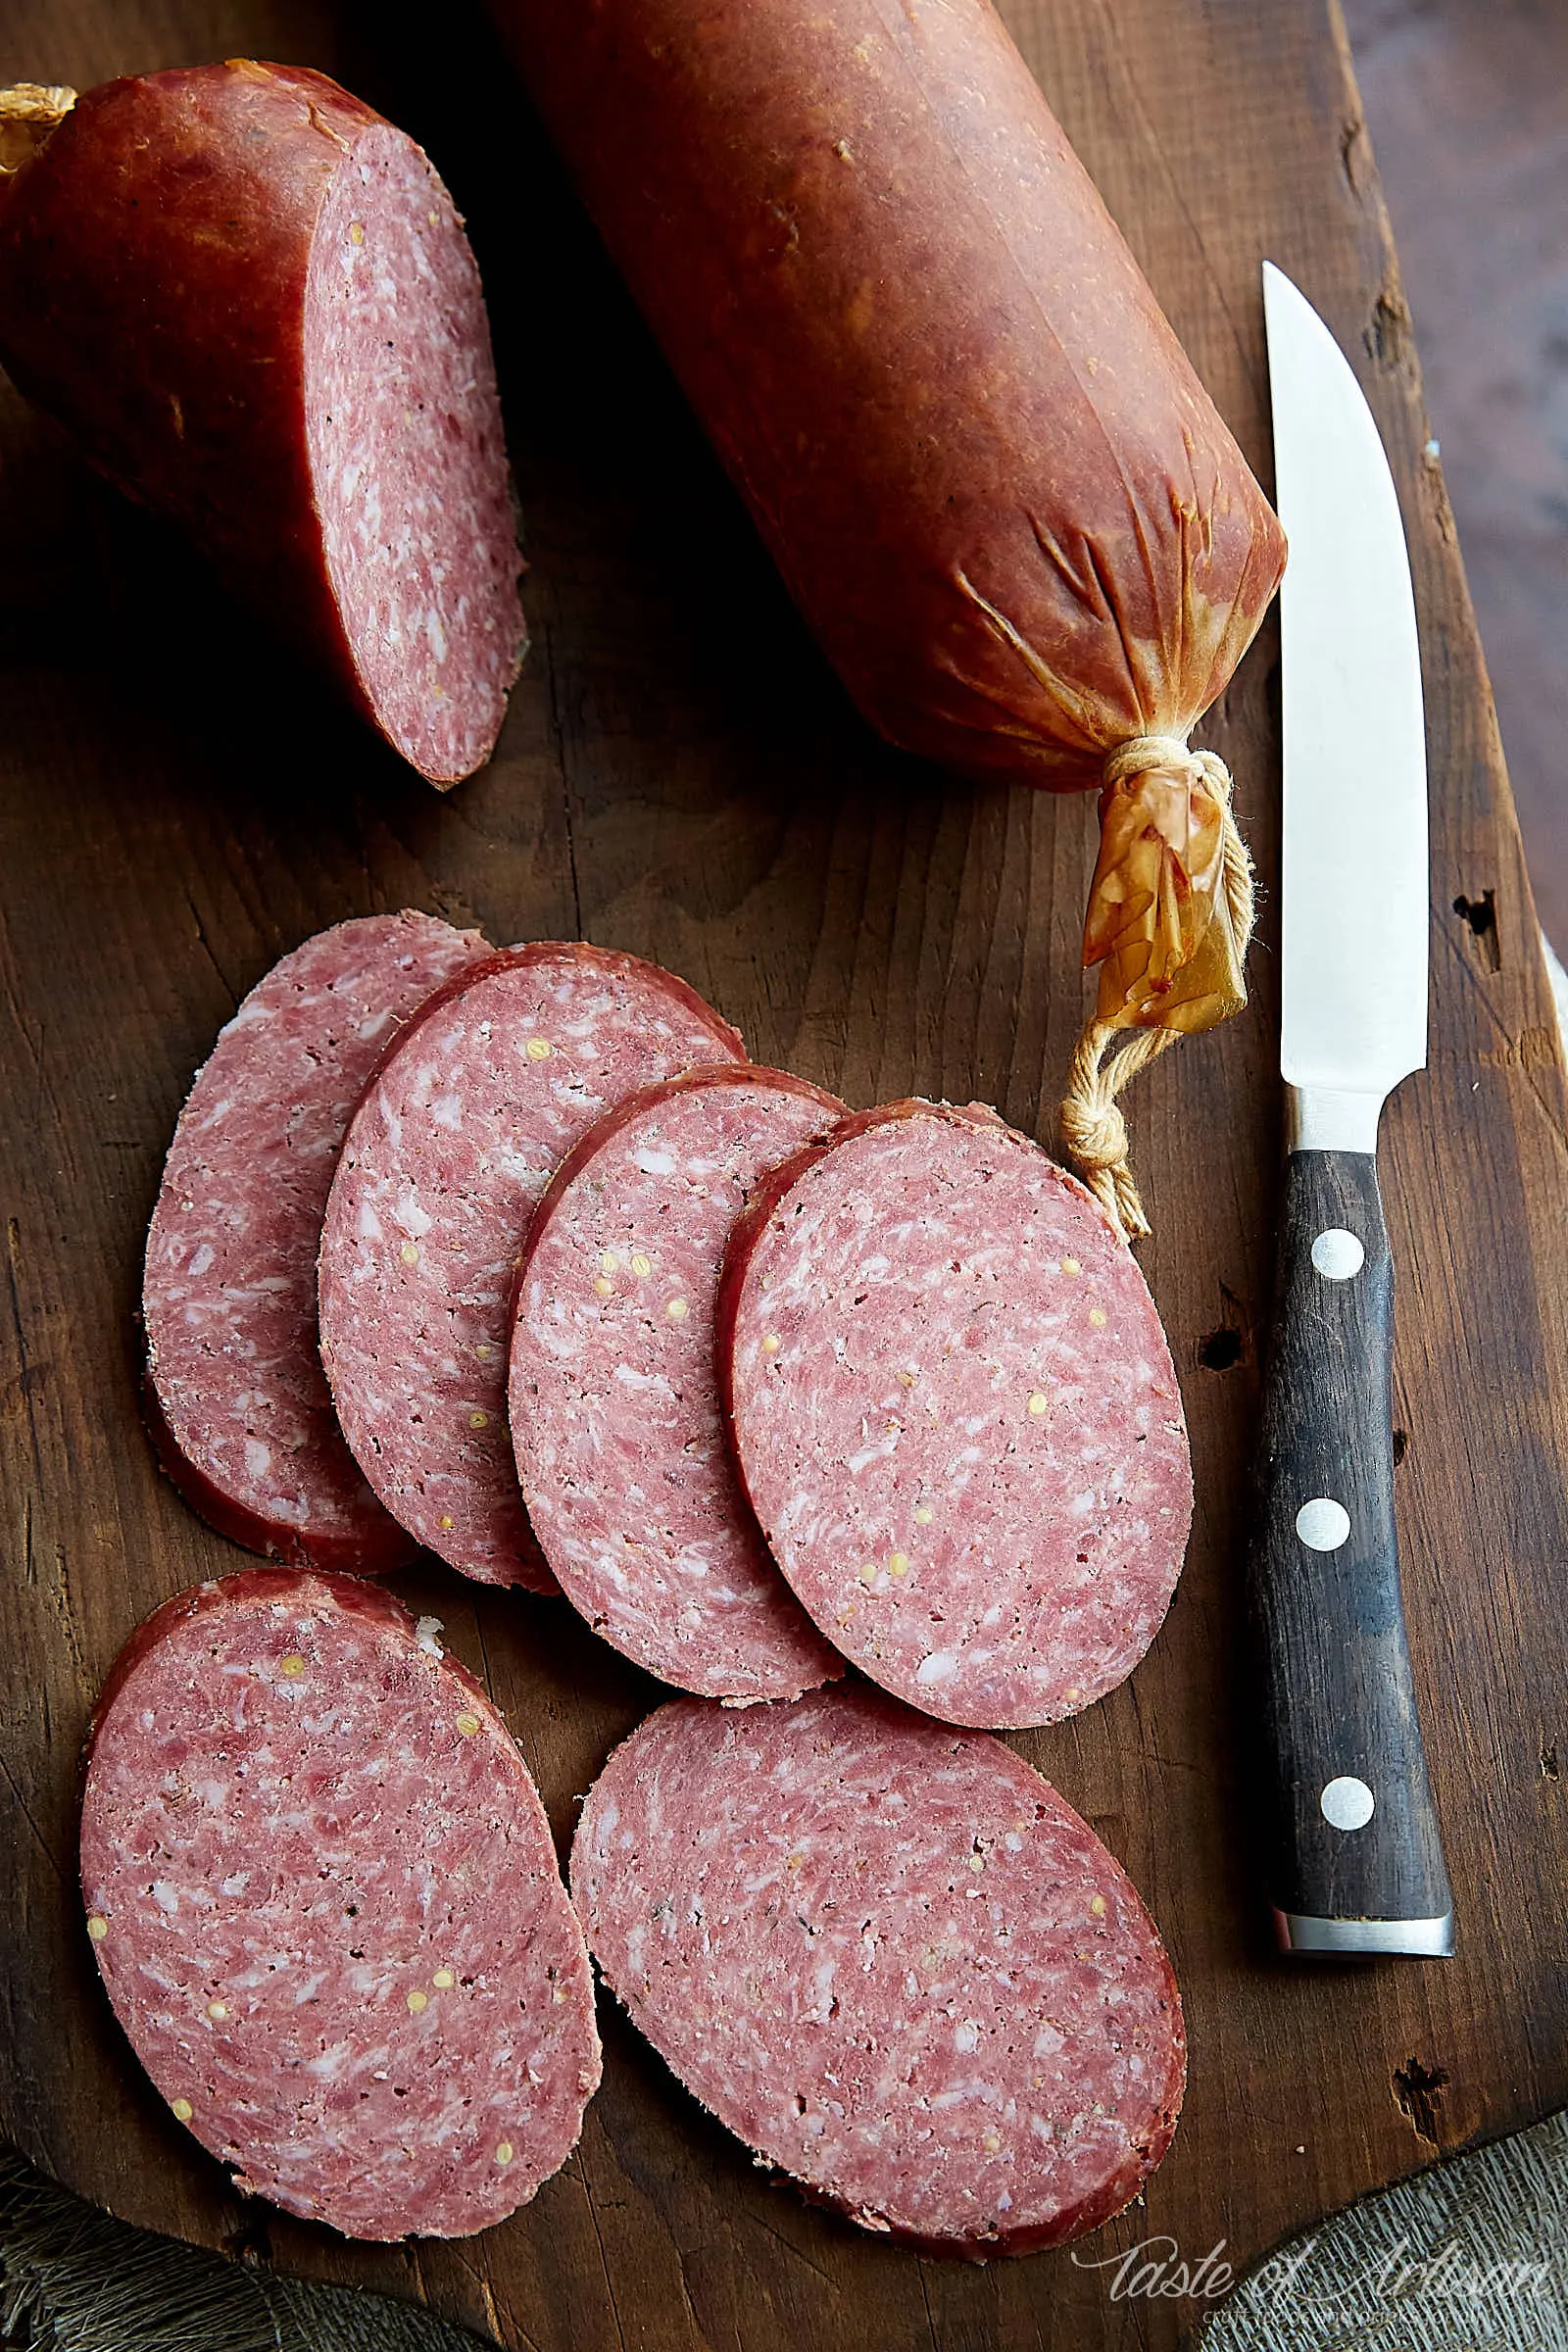 smoked summer sausage recipe - Is smoked summer sausage fully cooked